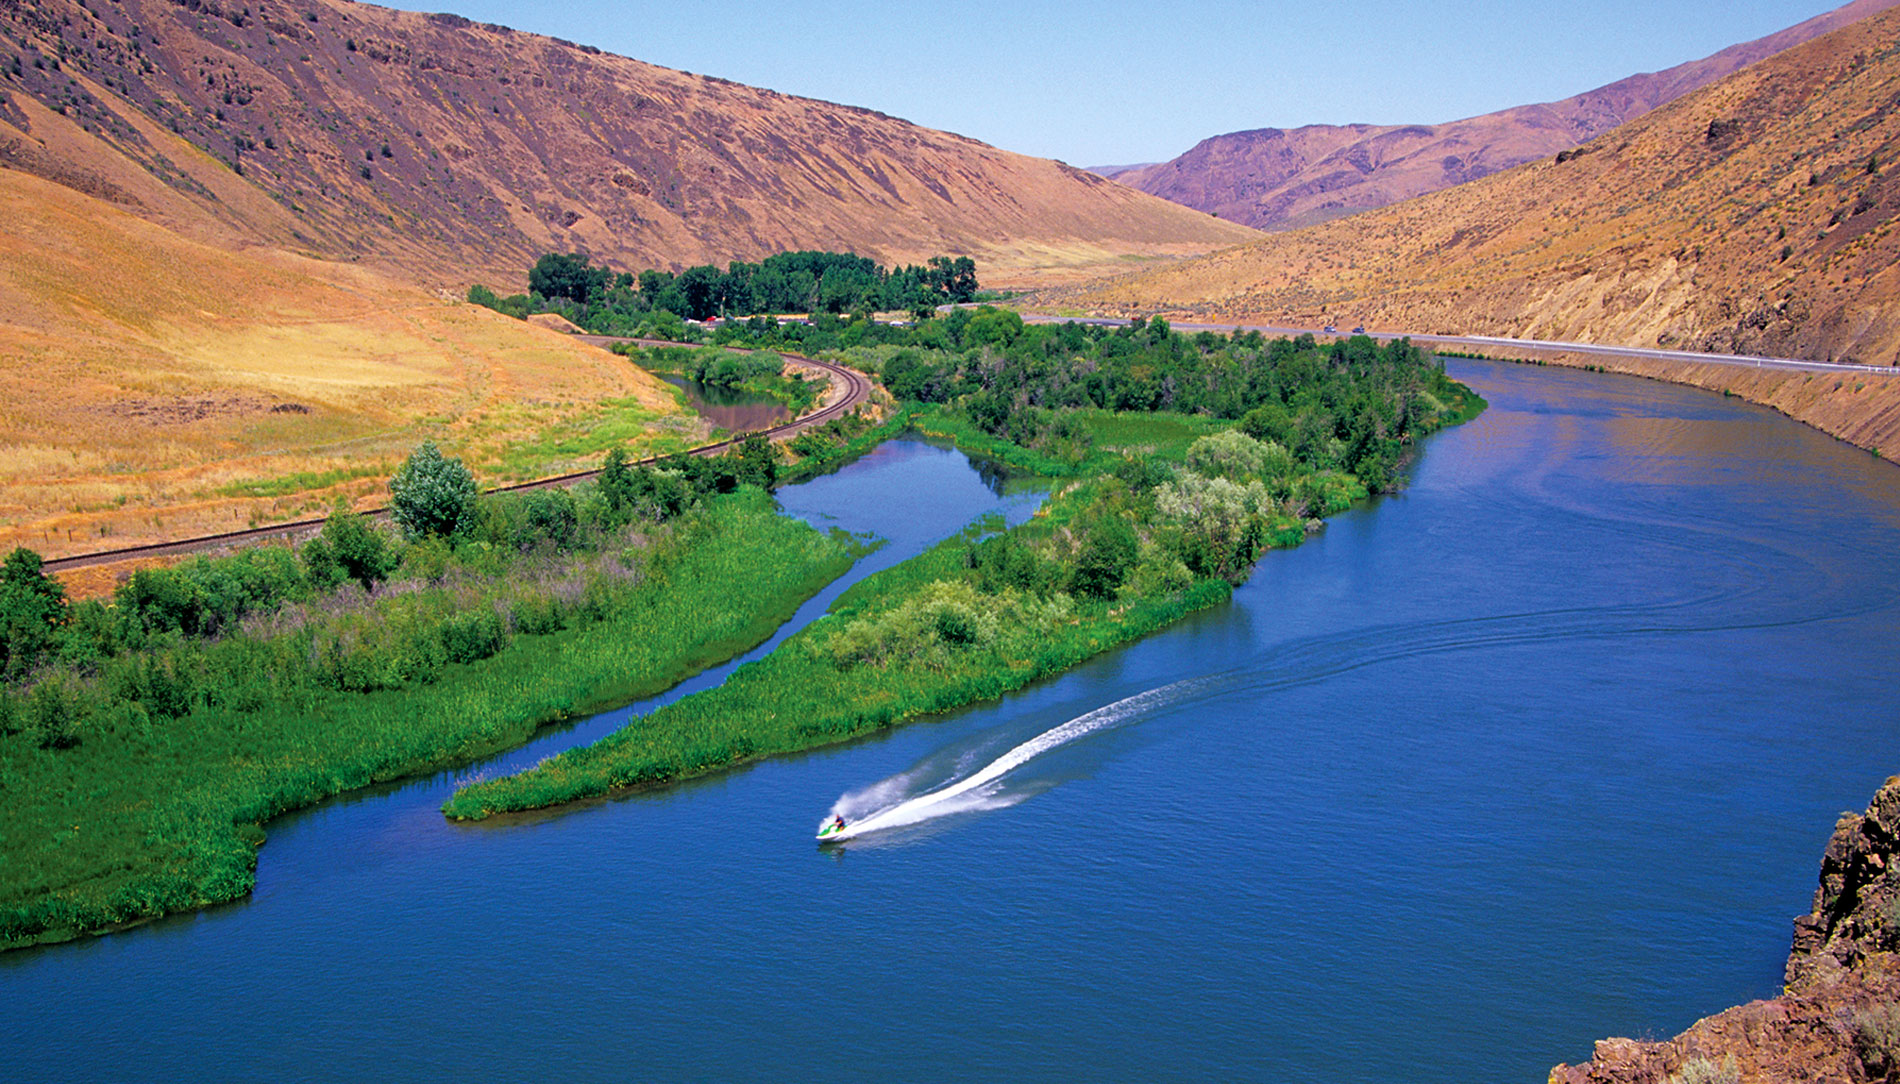 A Jet Ski cruises the blue waters of the Yakima River Canyon between Roza Recreation Site and Roza Dam.